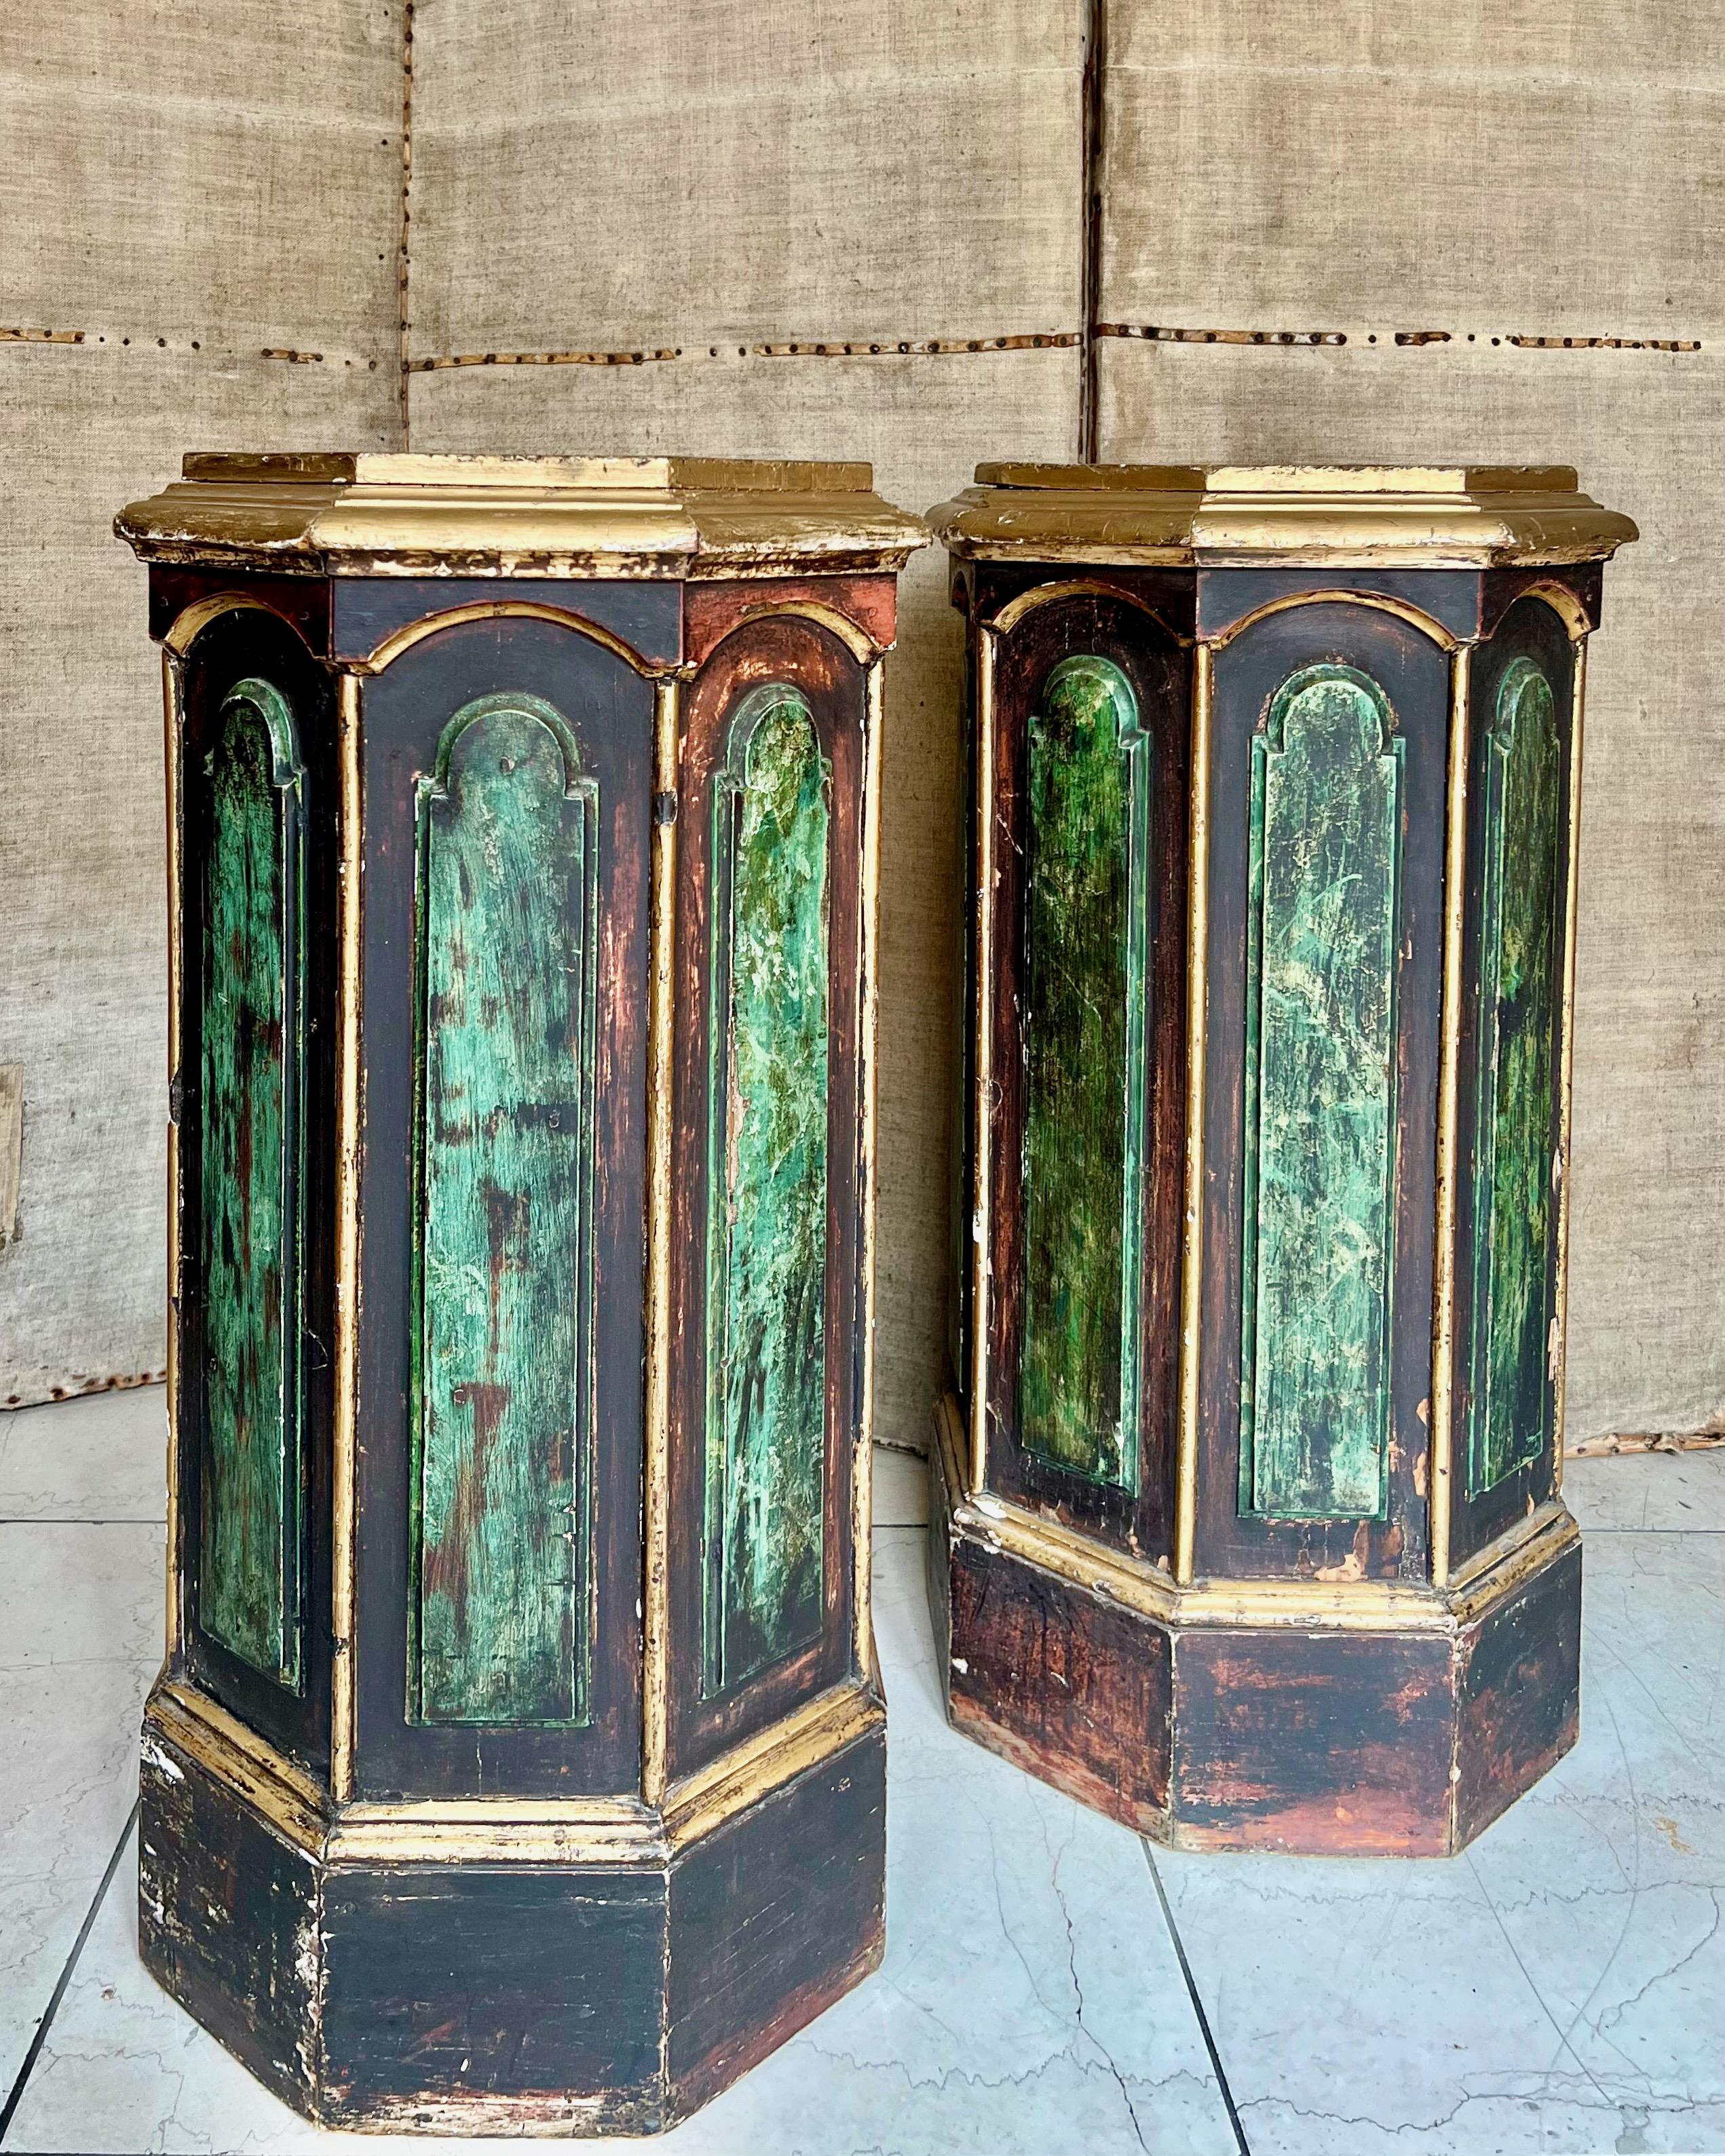 Pair of 19th century bust stands/pedestals/columns - painted, decorative paneled with molded tops and sides in octagon shape. Painted in decorative marble trompe l'oeil effect with gold trim accented.
Rare find - a great size for busts, art objects,